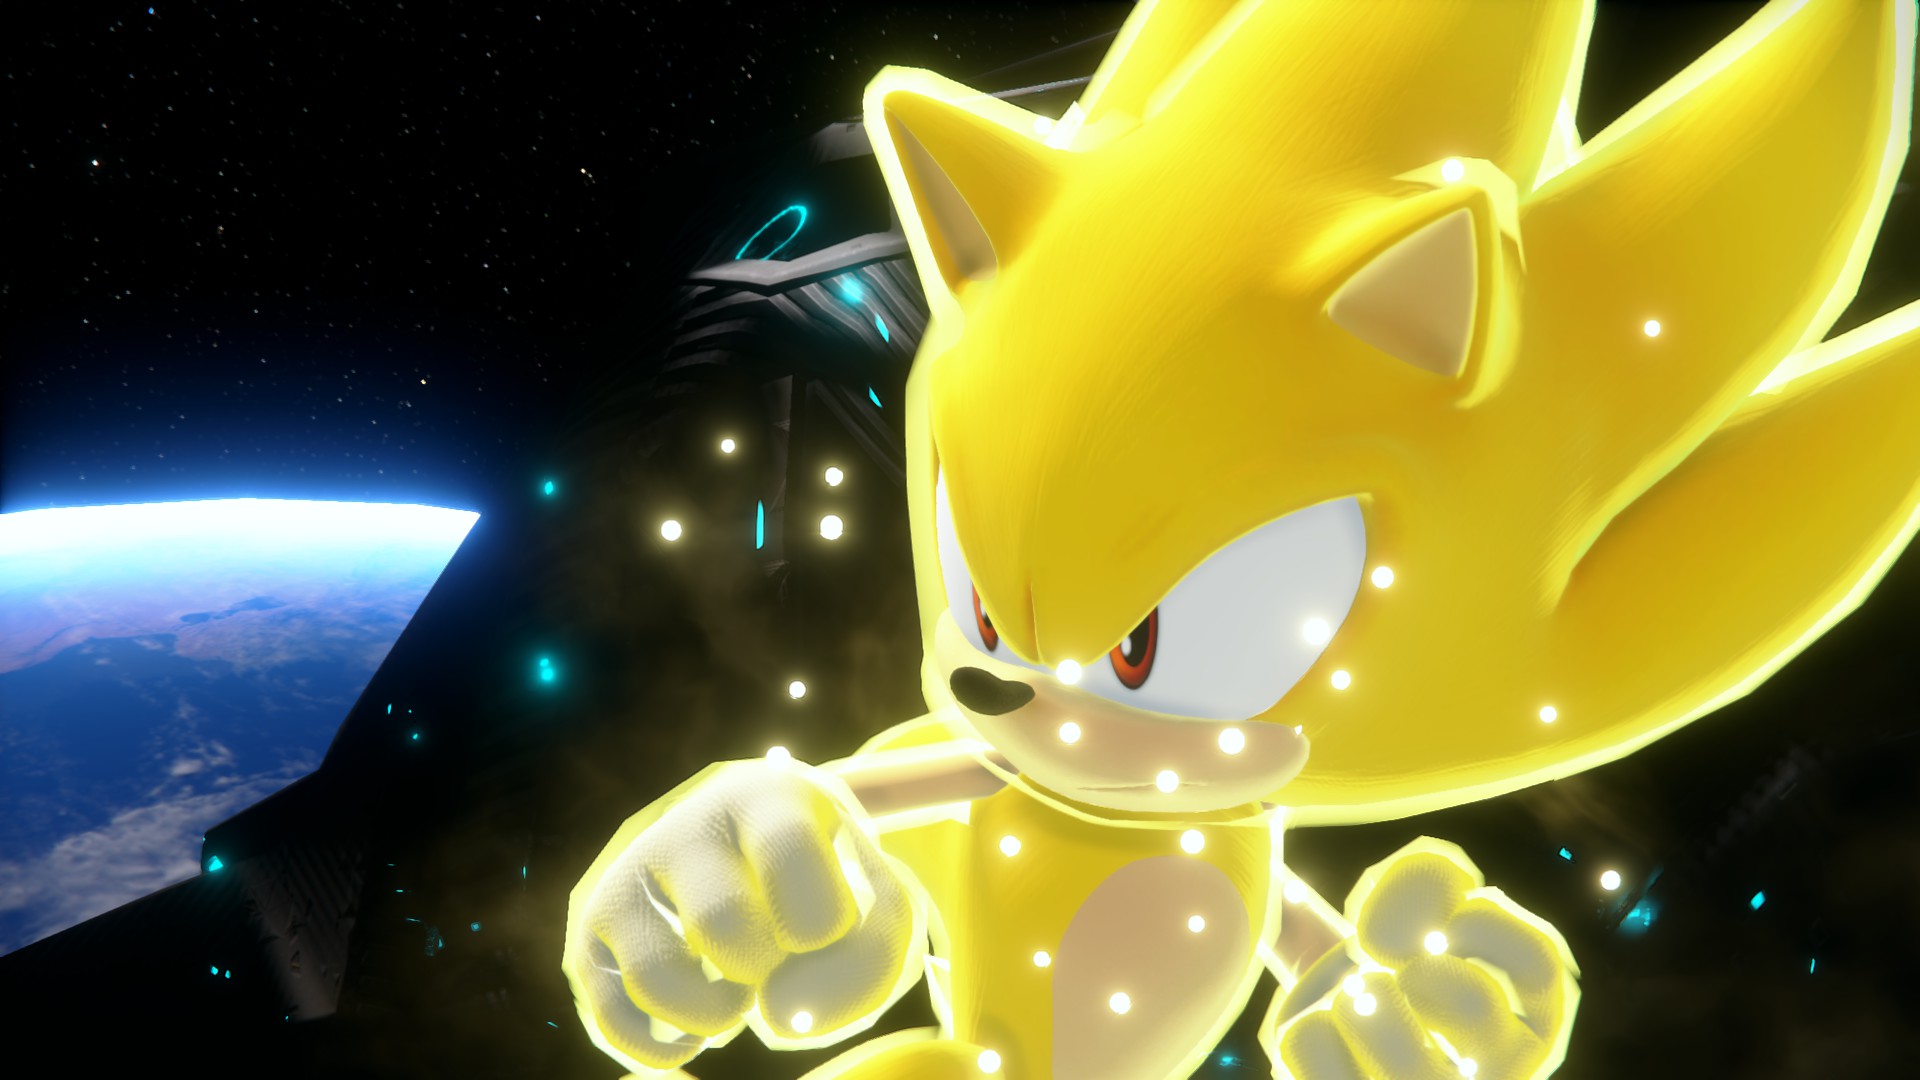 Sonic Frontiers' Metacritic Score Was Lower Than Expected